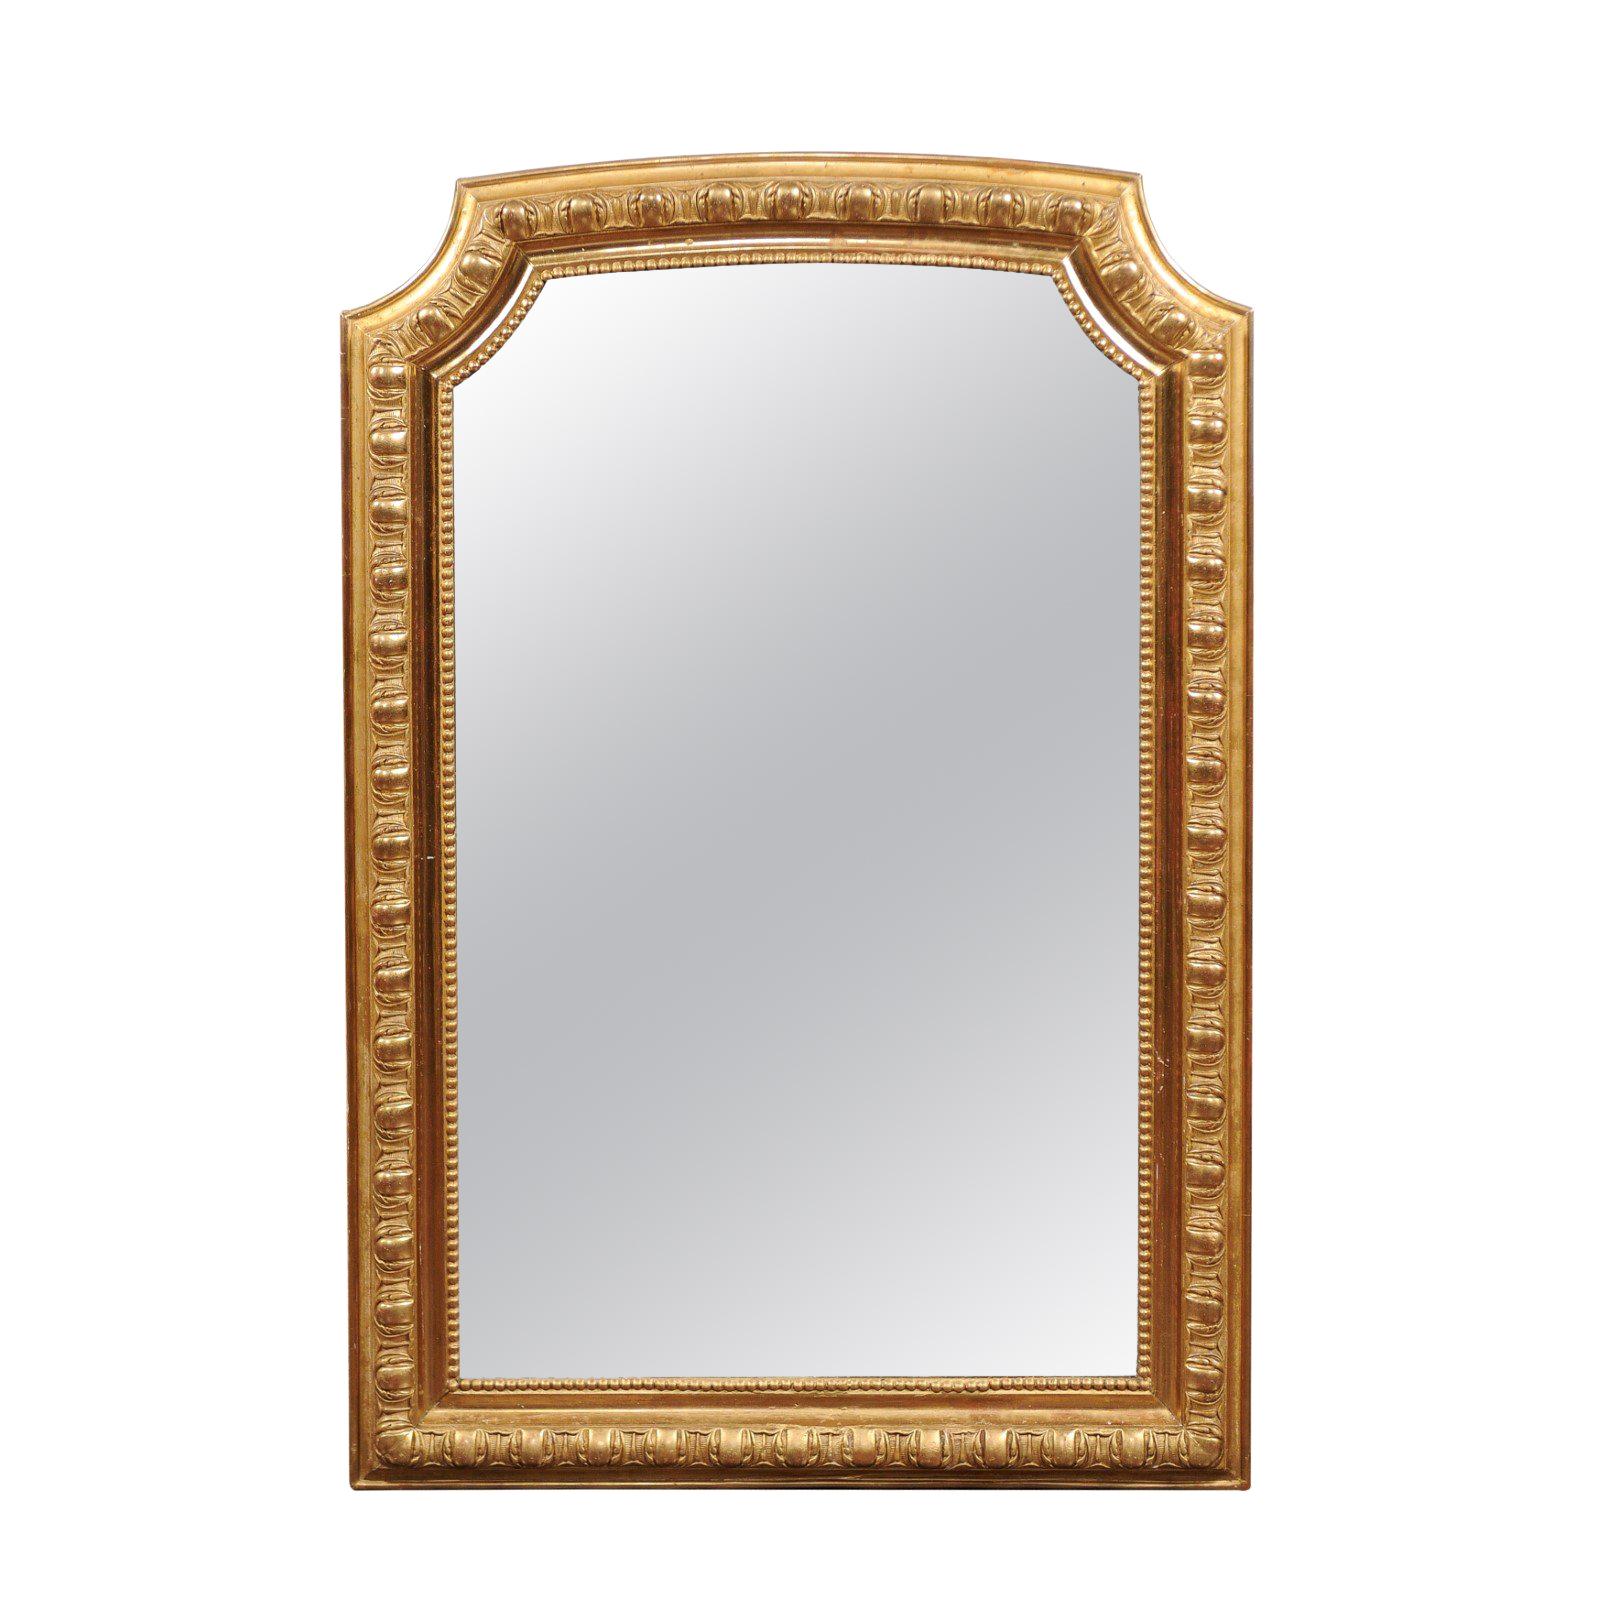 French Giltwood Wall Mirror with Carved Frame and Beaded Motifs, circa 1900